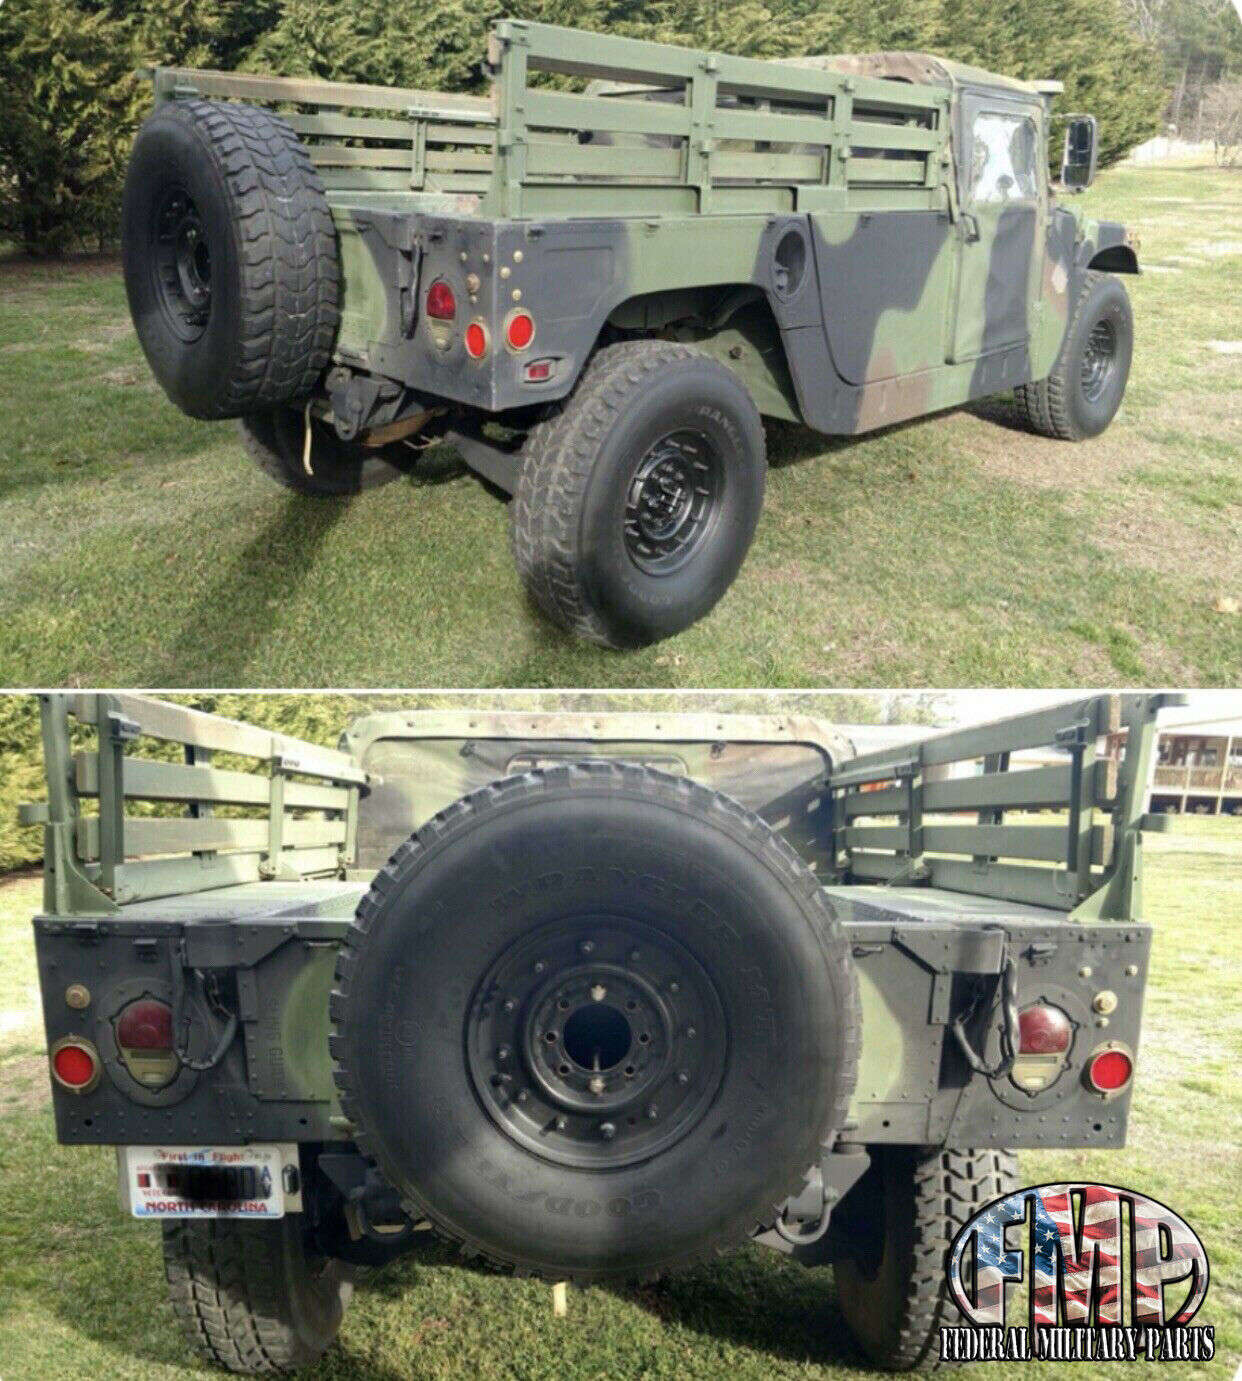 MILITARY HUMVEE SPARE TIRE CARRIER - TAILGATE MOUNTED M998 M1038 H-1 HUMMER